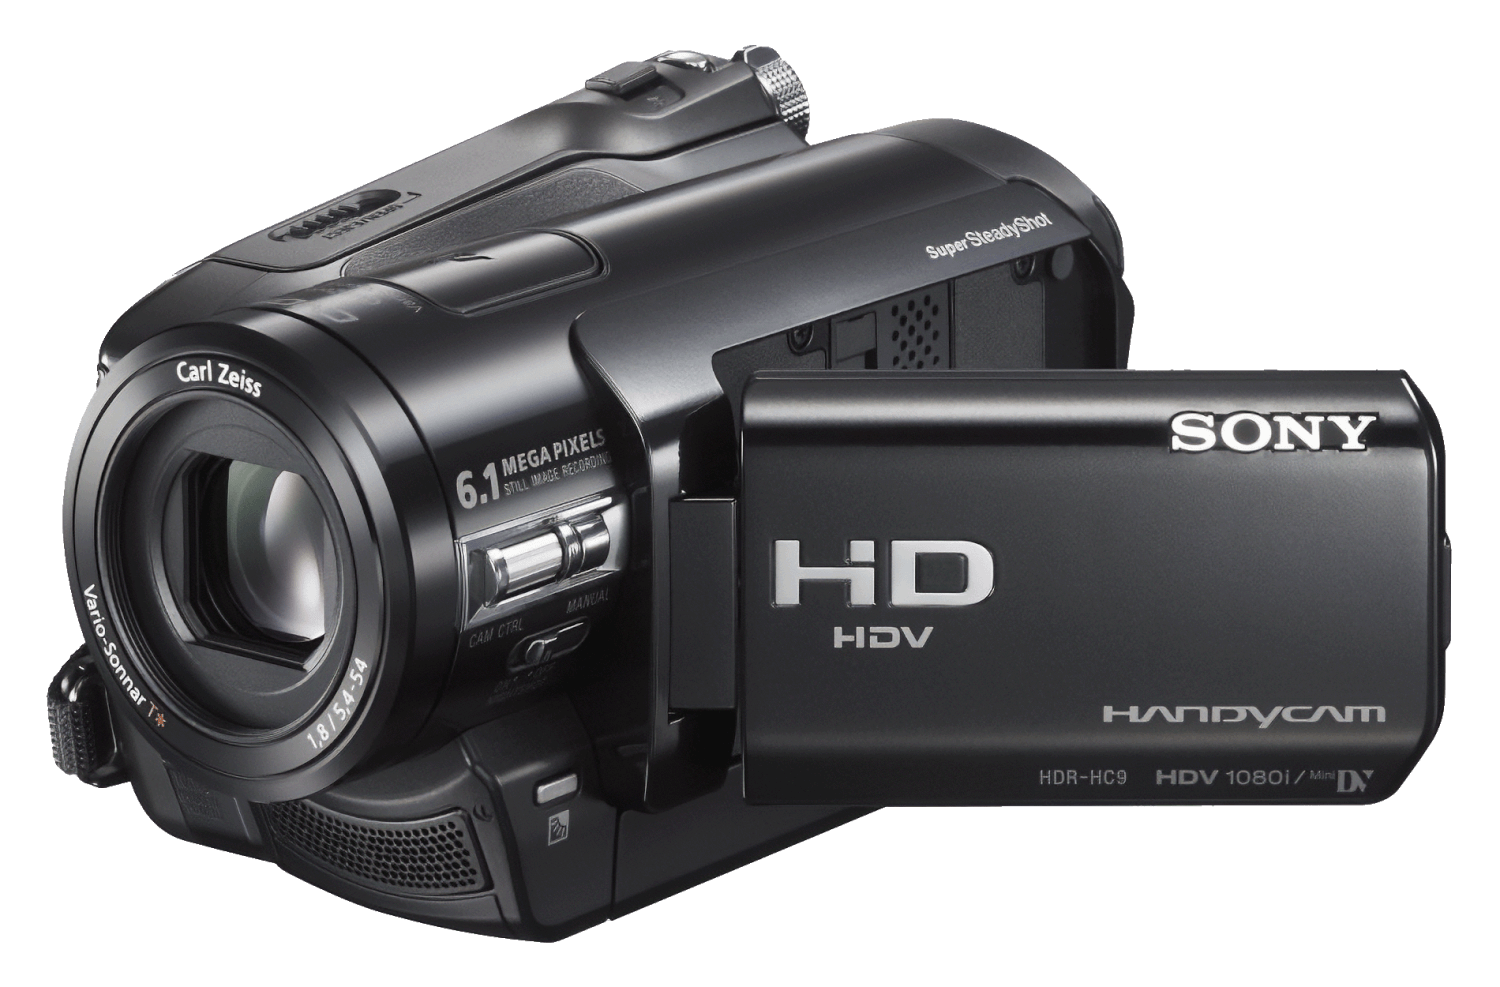 A Sony HDR-H9C video camcorder capable of recording HDV video to MiniDV cassettes